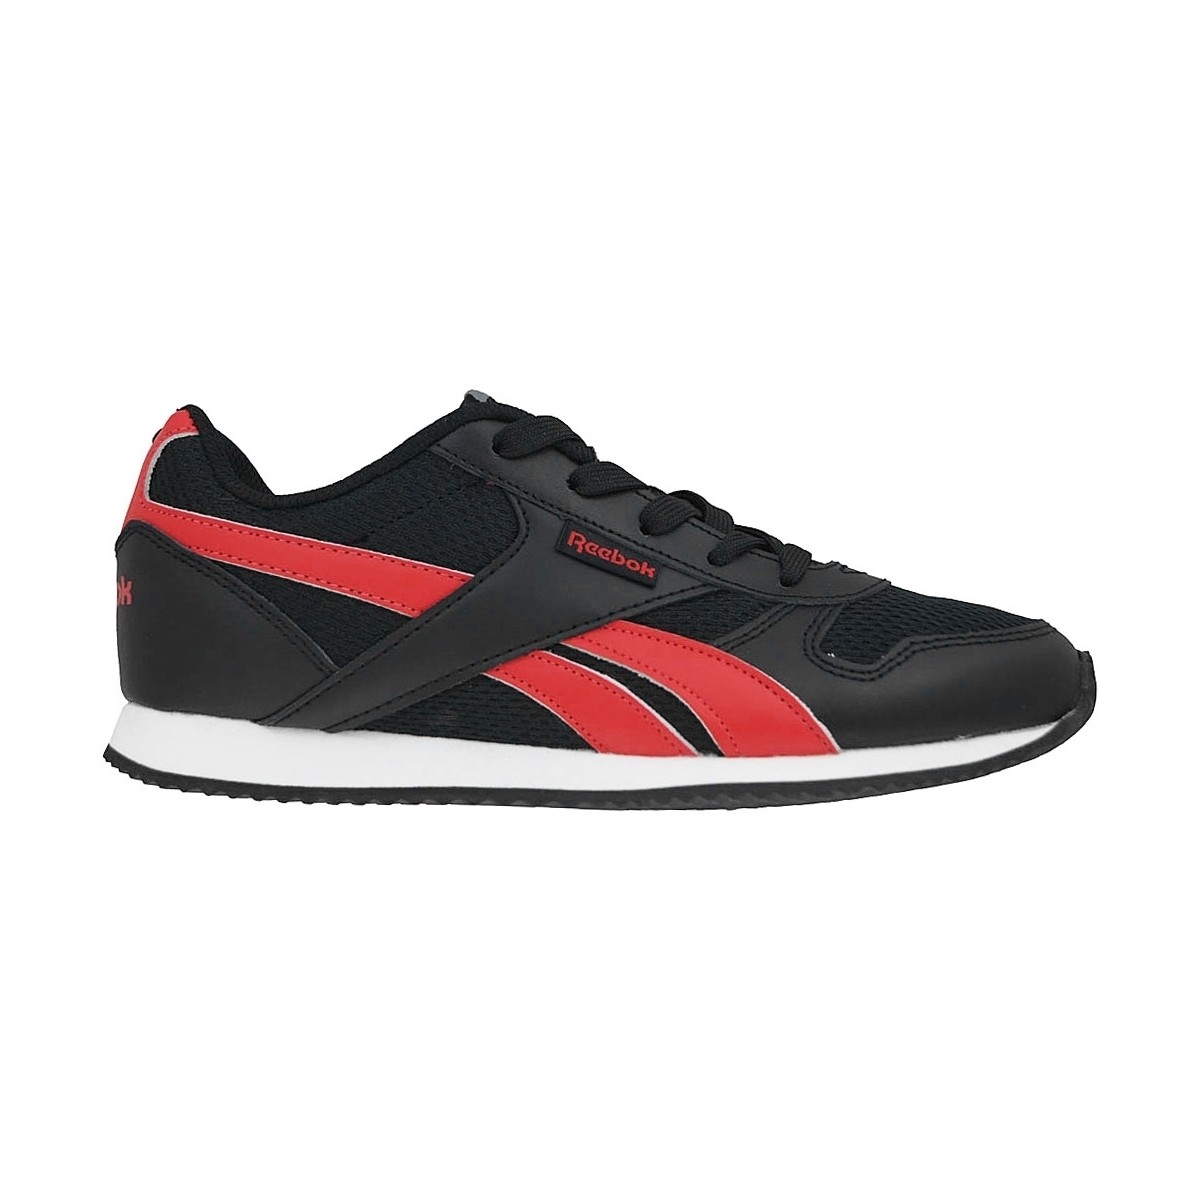 Shoes Children Low top trainers Reebok Sport Royal Cljogger Black, Red